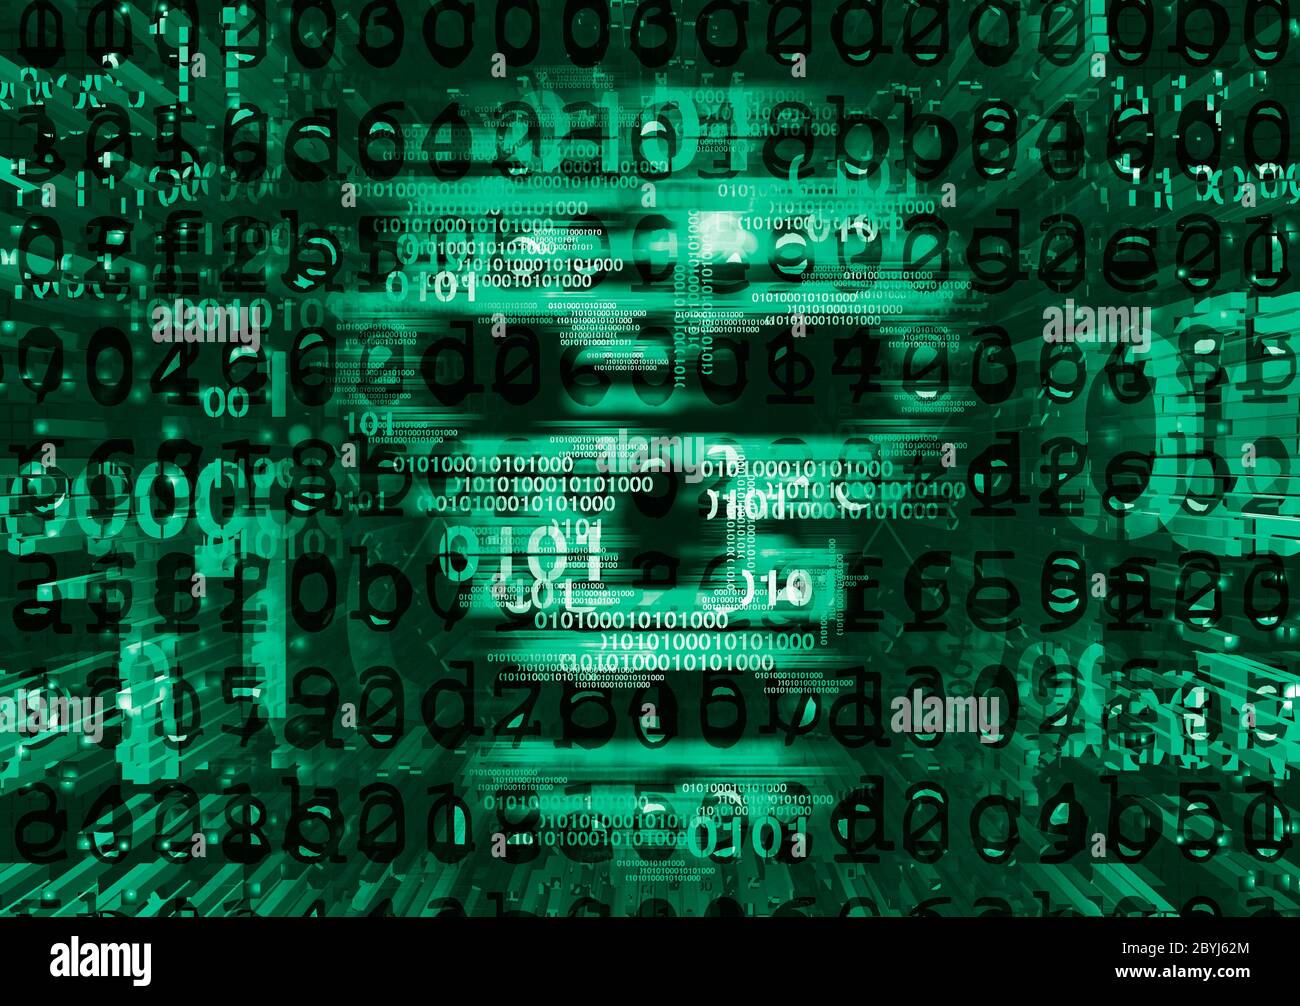 Skull,Hacker,Computer virus concept. Illustration of Abstract Skull sign with destroyed letters and binary code. Web Hacking. Online piracy concept. Stock Photo